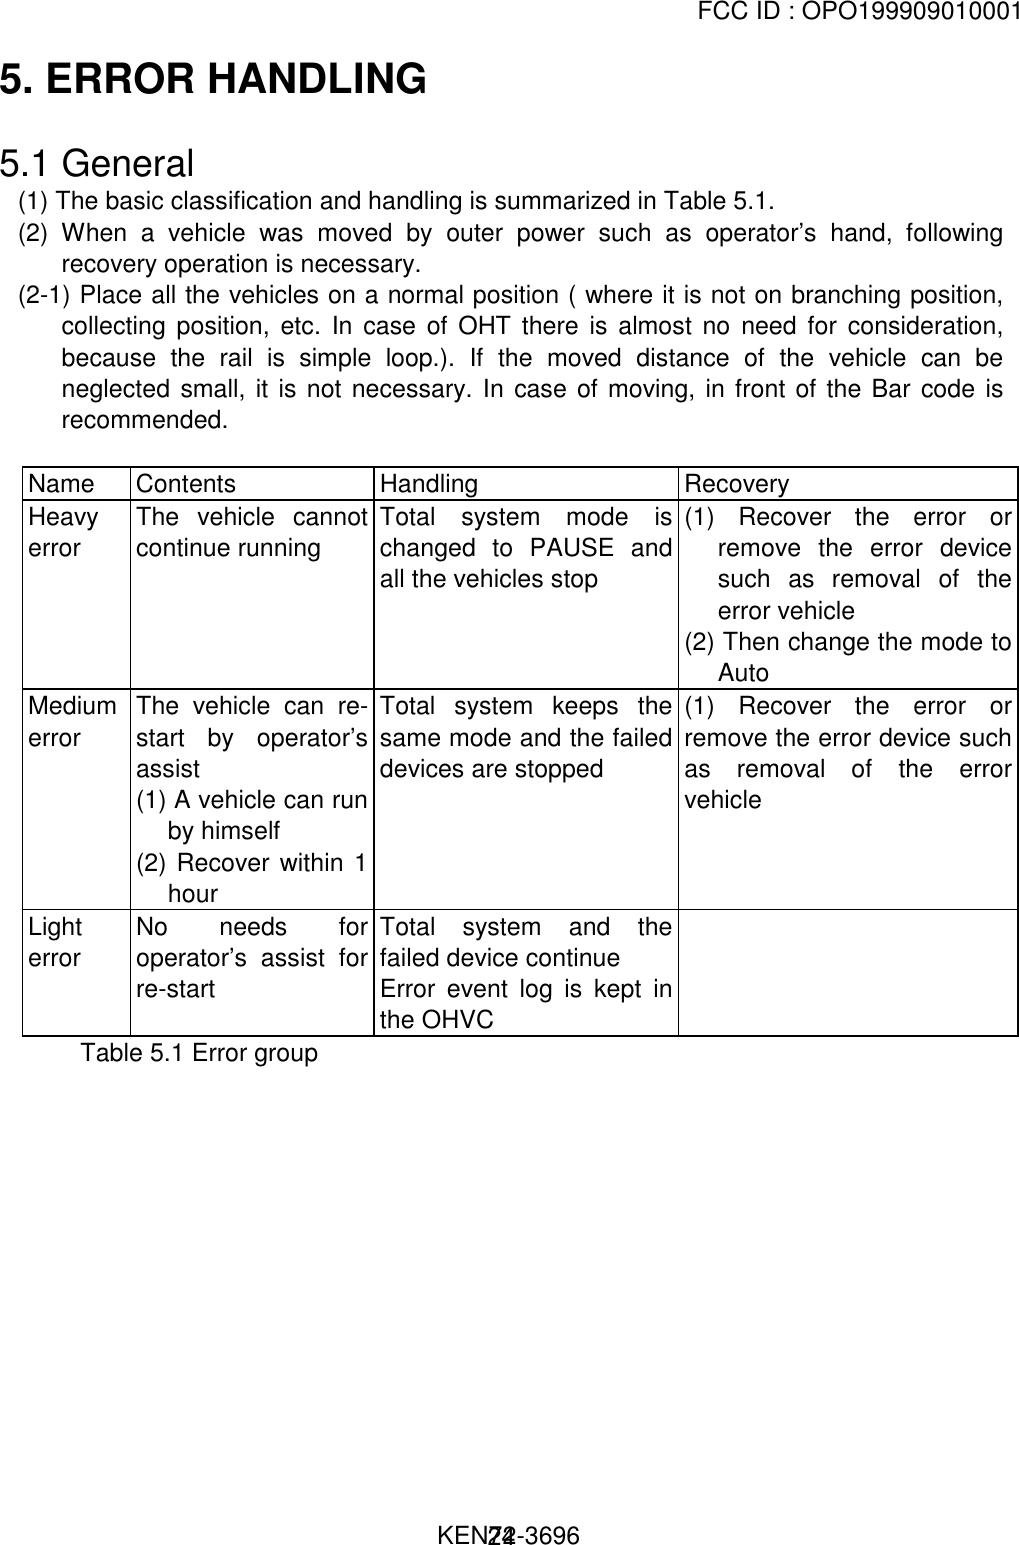 FCC ID : OPO199909010001                                                               KEN72-3696245. ERROR HANDLING5.1 General(1) The basic classification and handling is summarized in Table 5.1.(2) When a vehicle was moved by outer power such as operator’s hand, followingrecovery operation is necessary.(2-1) Place all the vehicles on a normal position ( where it is not on branching position,collecting position, etc. In case of OHT there is almost no need for consideration,because the rail is simple loop.). If the moved distance of the vehicle can beneglected small, it is not necessary. In case of moving, in front of the Bar code isrecommended.Name Contents Handling RecoveryHeavyerrorThe vehicle cannotcontinue runningTotal system mode ischanged to PAUSE andall the vehicles stop(1) Recover the error orremove the error devicesuch as removal of theerror vehicle(2) Then change the mode toAutoMediumerrorThe vehicle can re-start by operator’sassist(1) A vehicle can runby himself(2) Recover within 1hourTotal system keeps thesame mode and the faileddevices are stopped(1) Recover the error orremove the error device suchas removal of the errorvehicleLighterrorNo needs foroperator’s assist forre-startTotal system and thefailed device continueError event log is kept inthe OHVC         Table 5.1 Error group